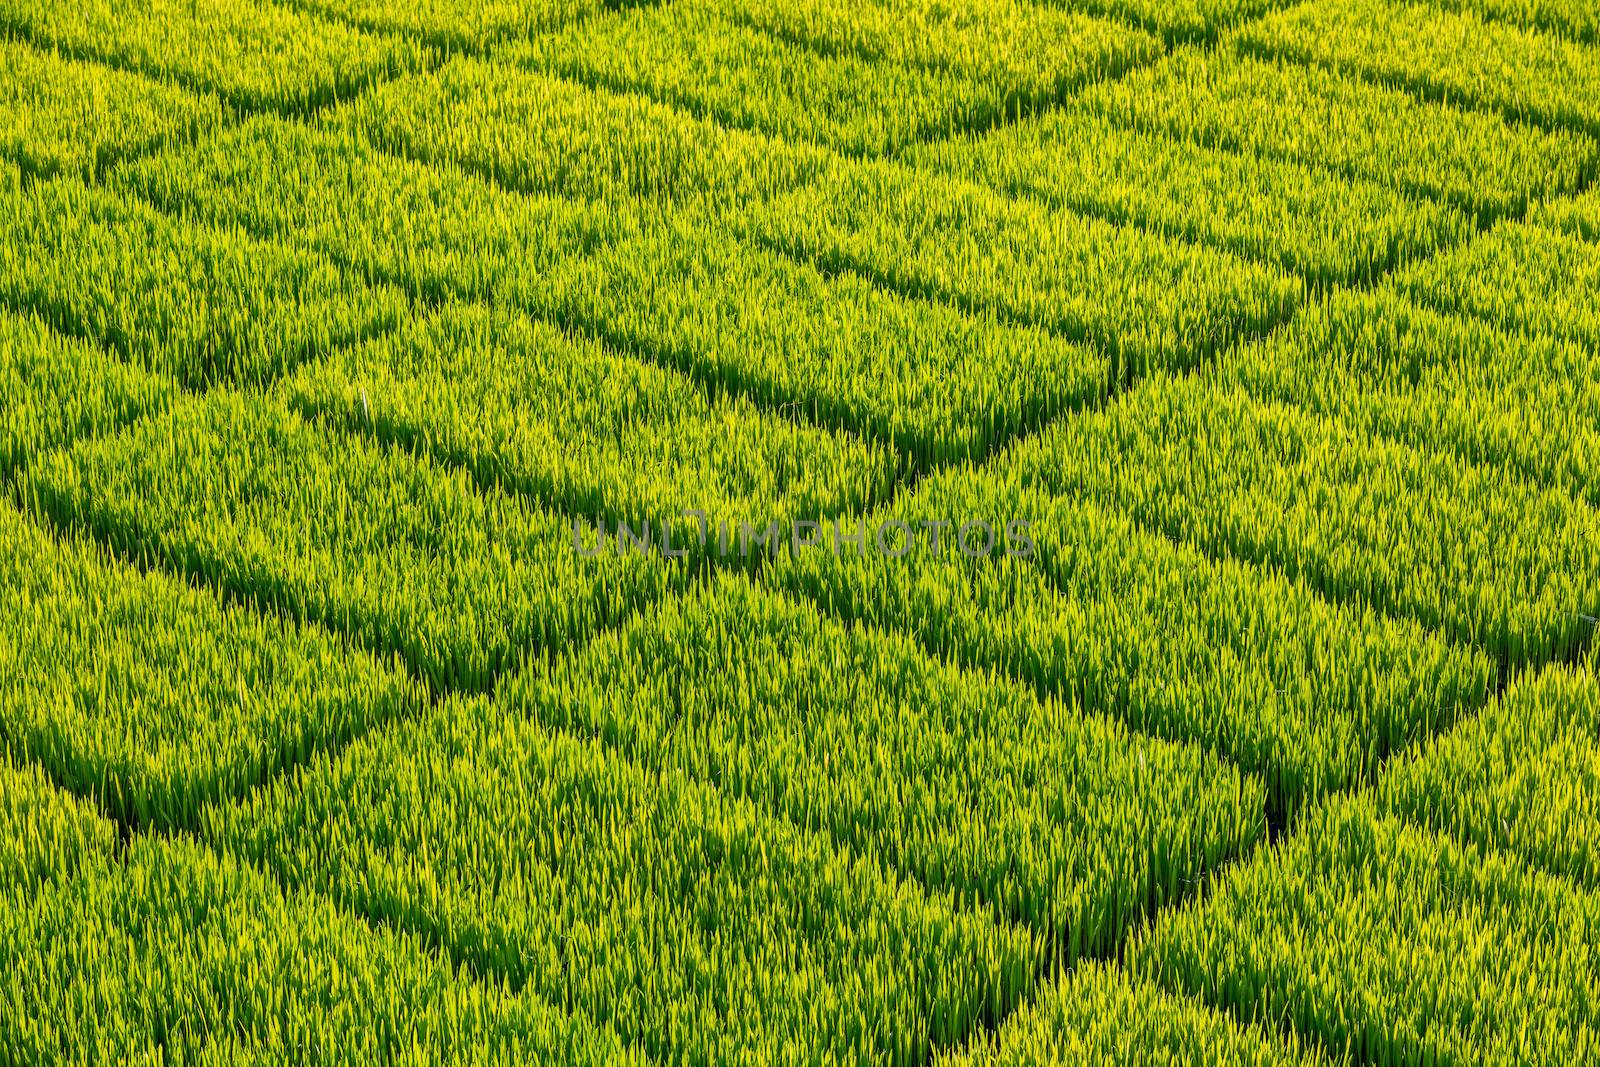 Rice sprout field in Thailand